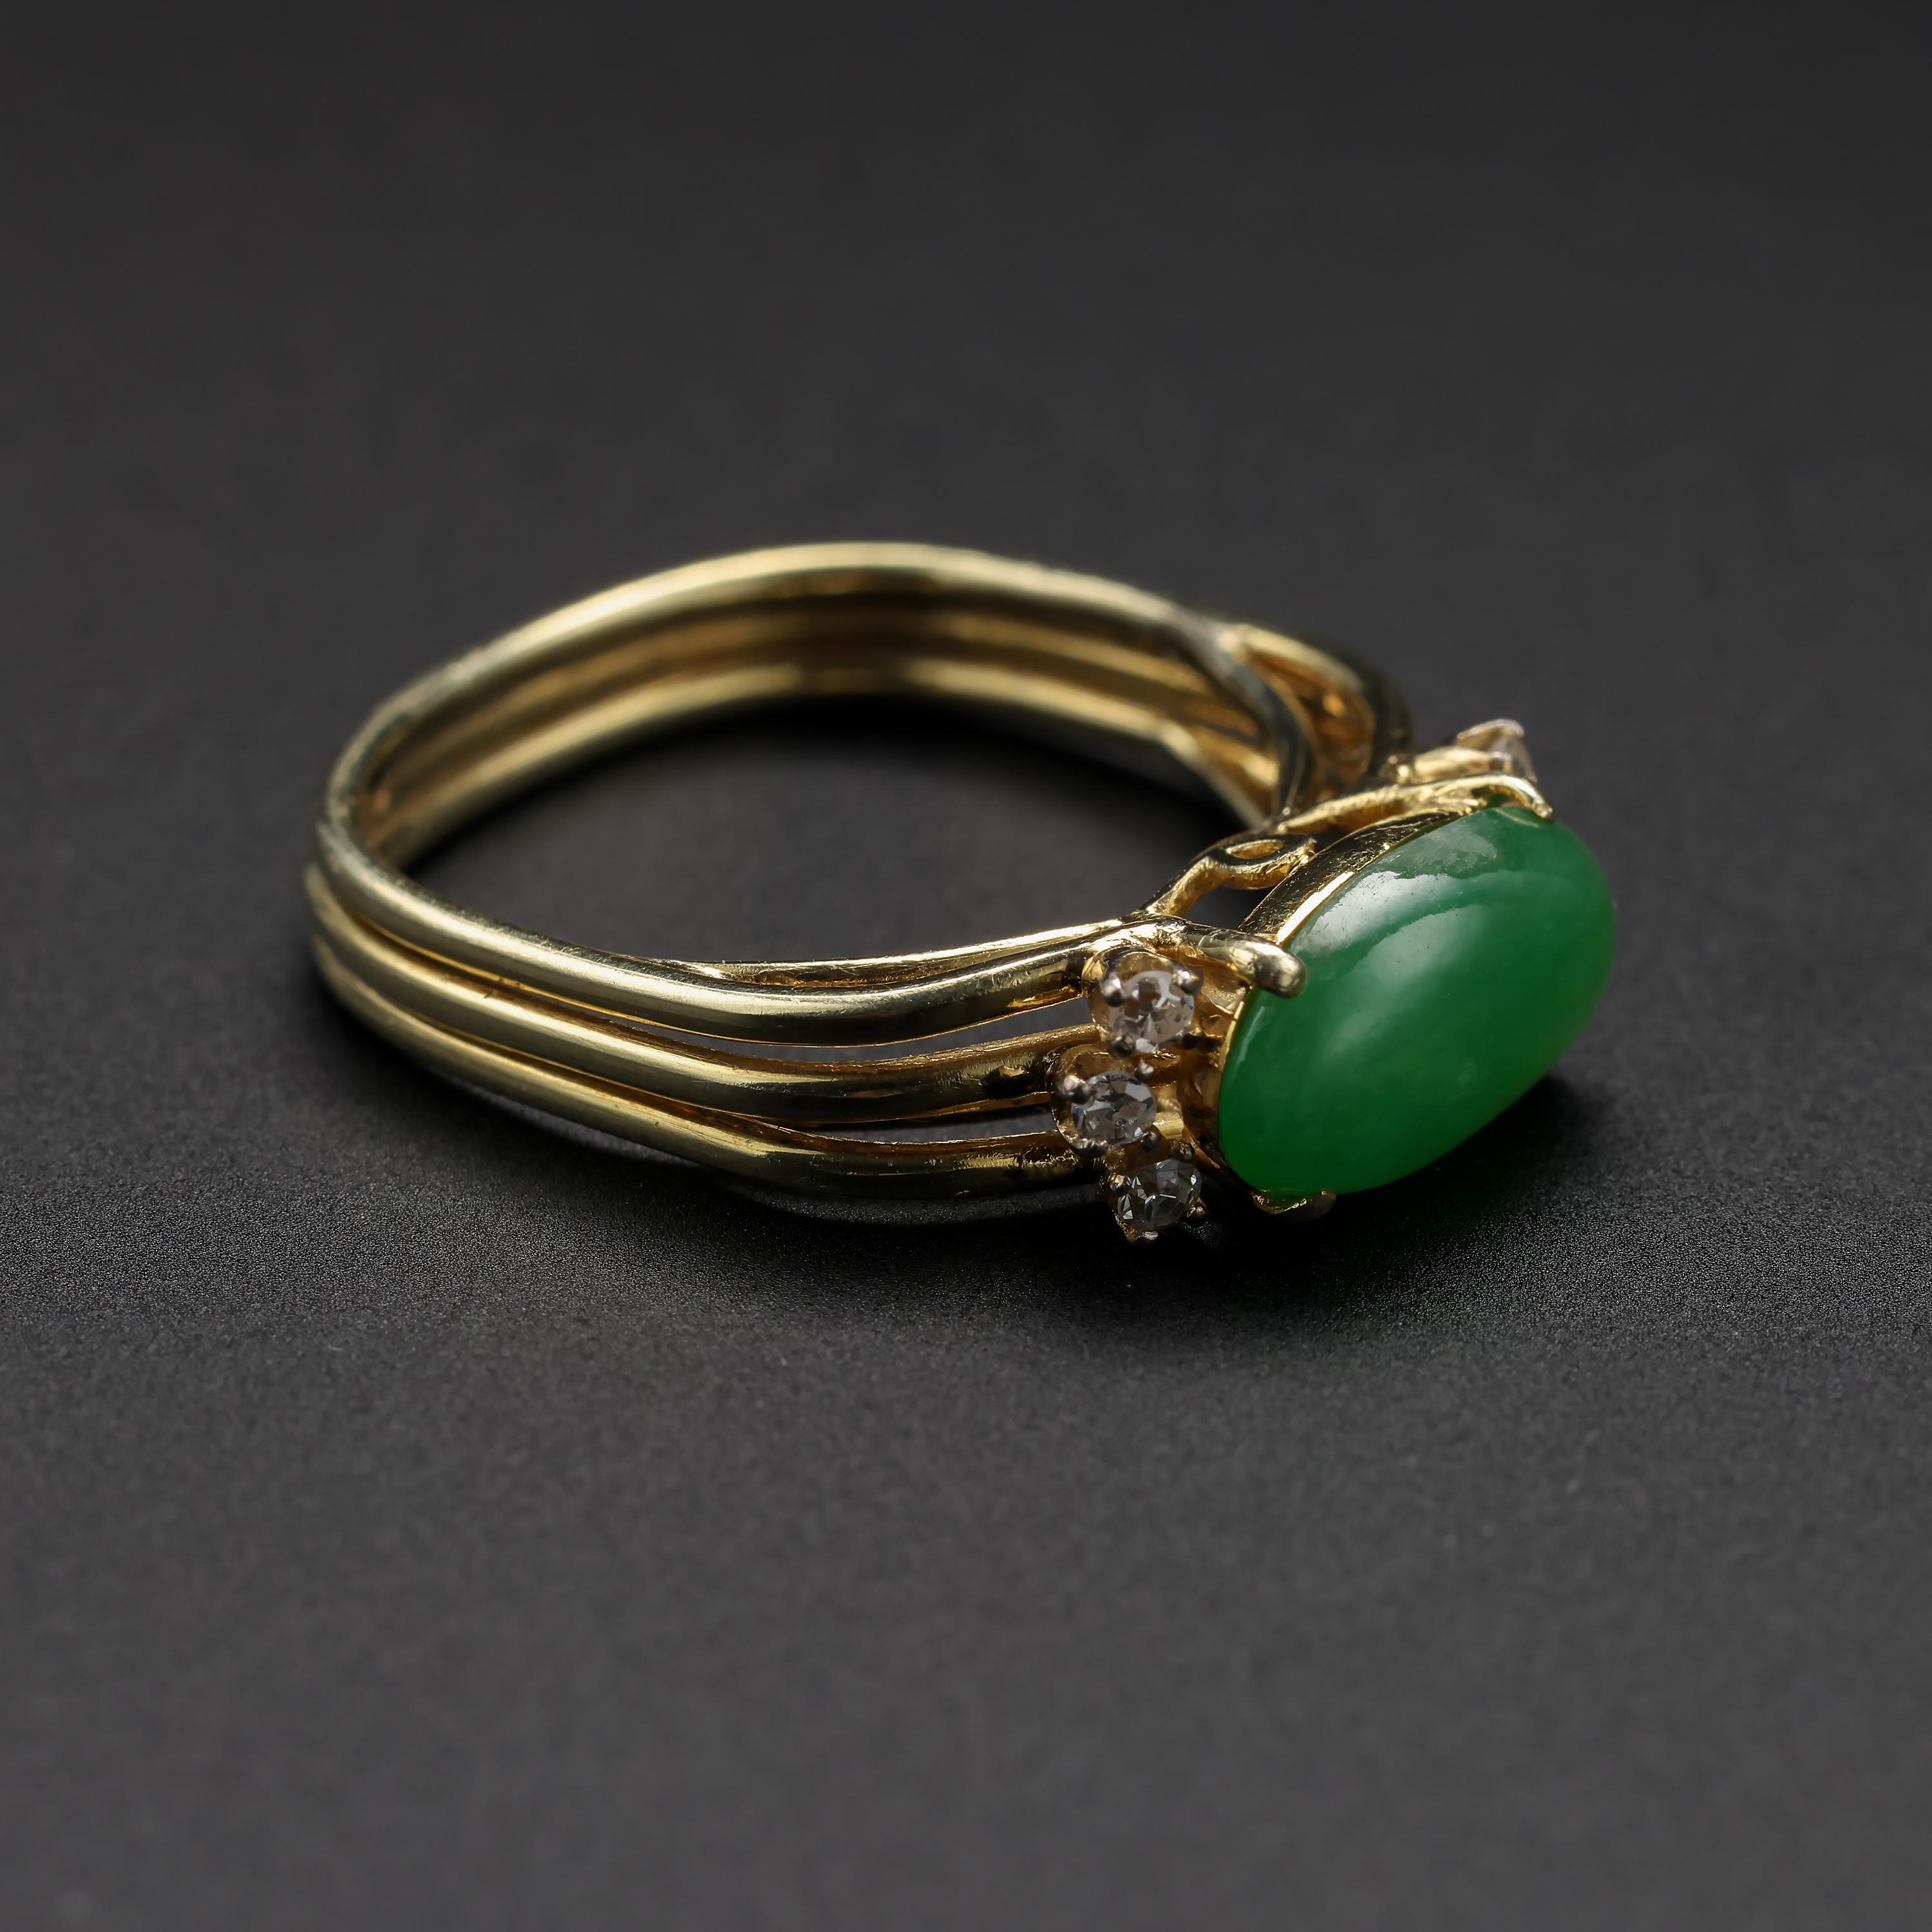 This vintage jade ring features an elongated 11.42mm x 6.55mm luscious green cabochon of translucent, certified-untreated jadeite. Three small but firey and bright near-colorless eye-clean diamonds are prong-set on either side of the jade and they